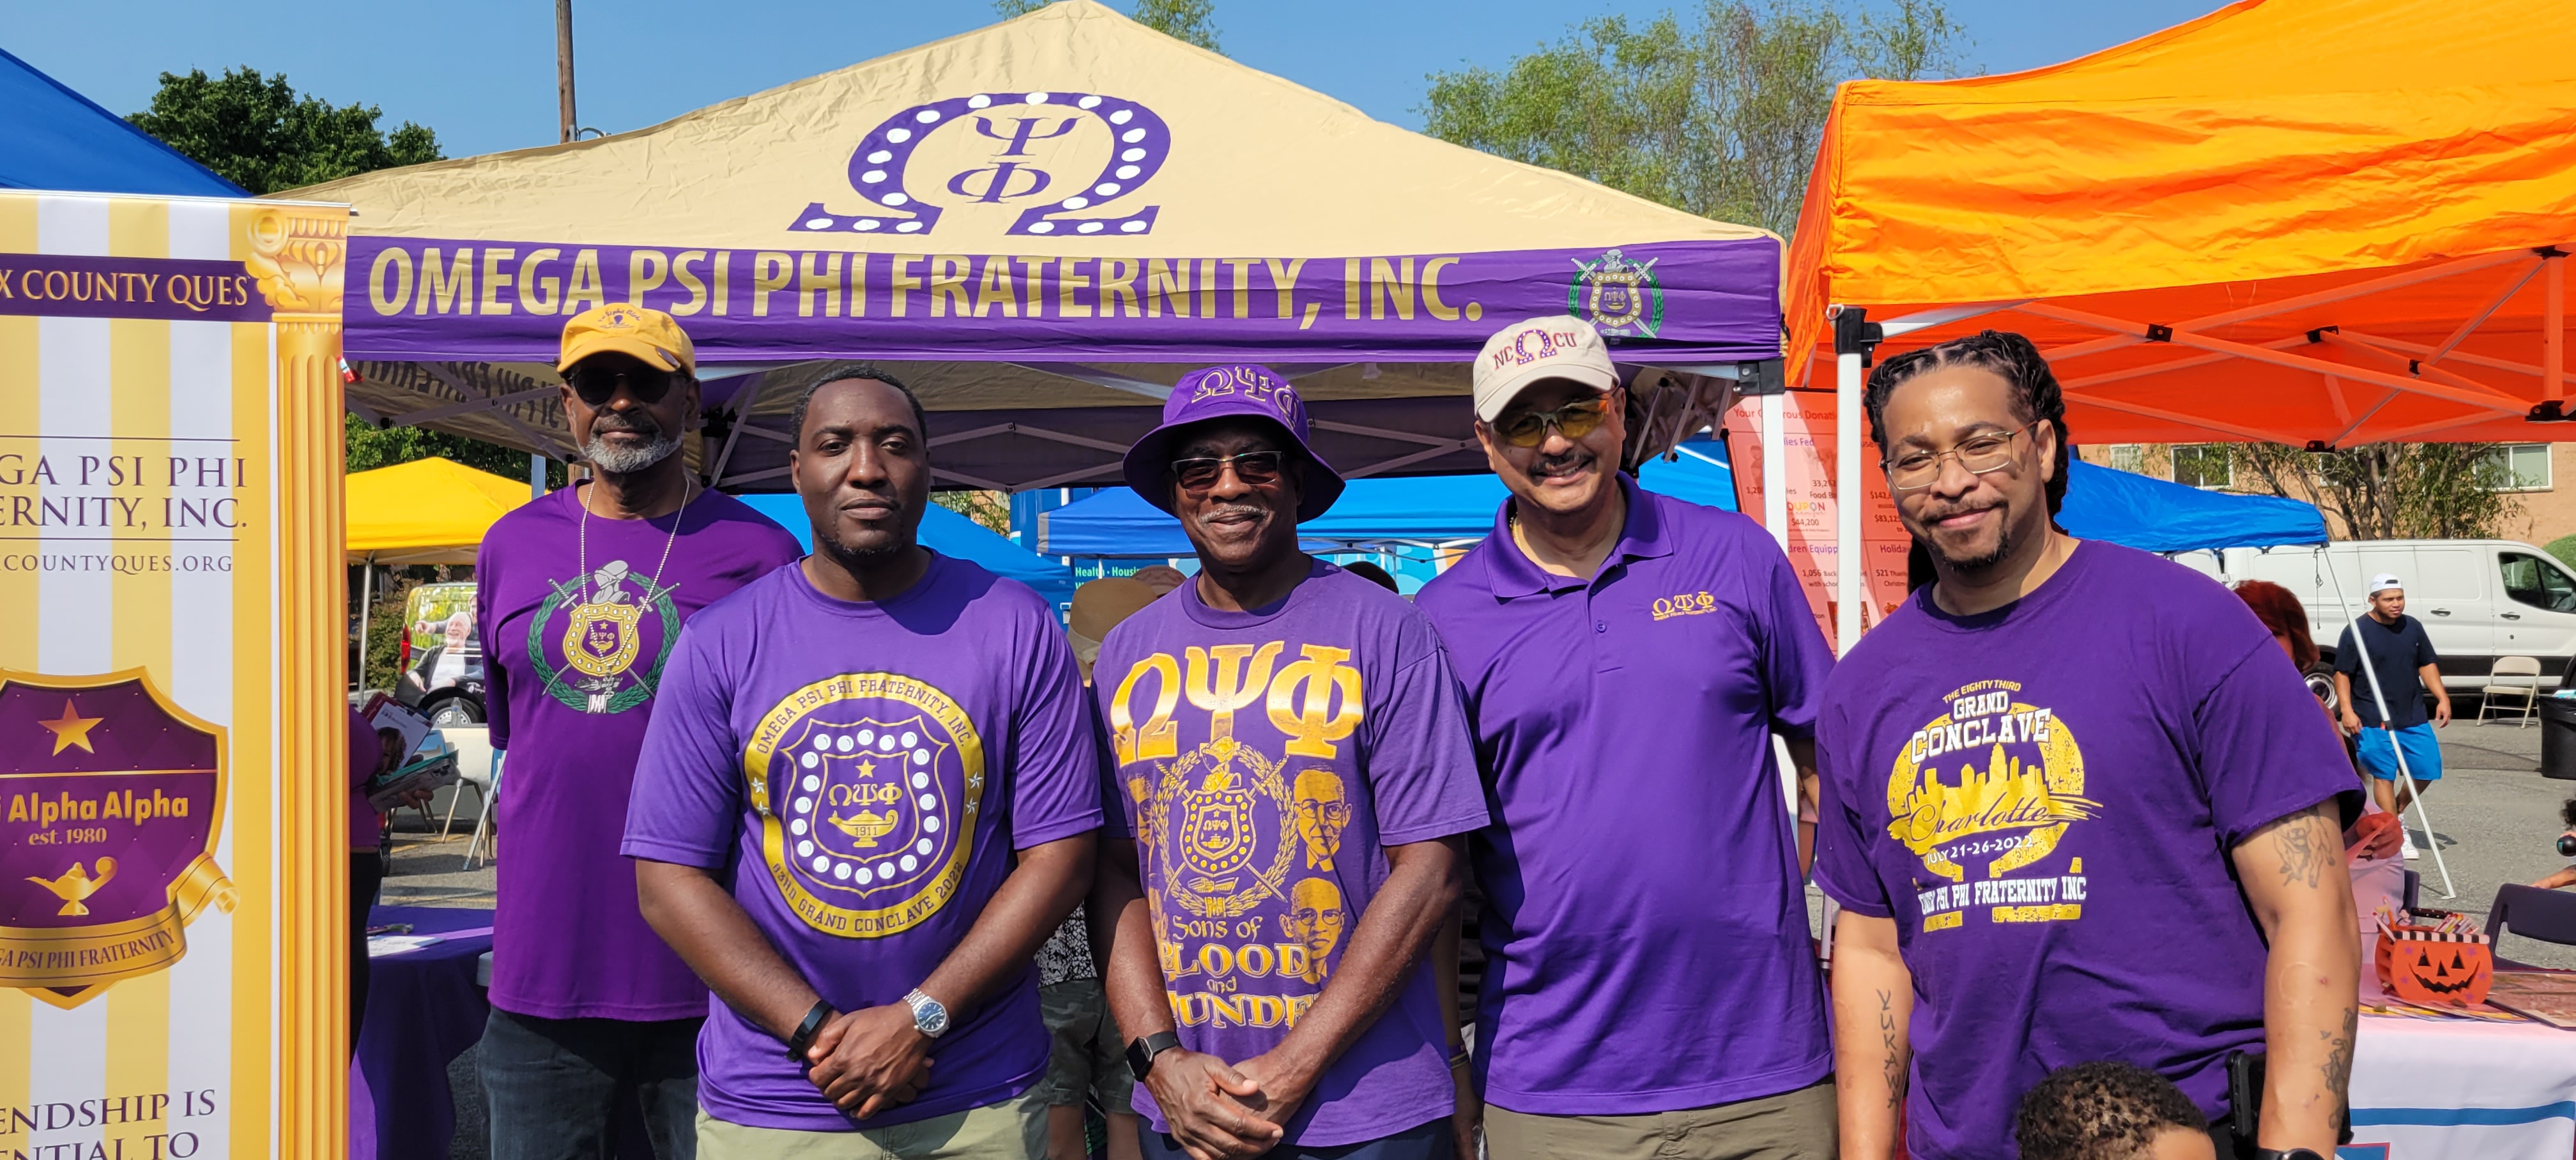 Omega Psi Phi Fraternity, Inc. members and their information table